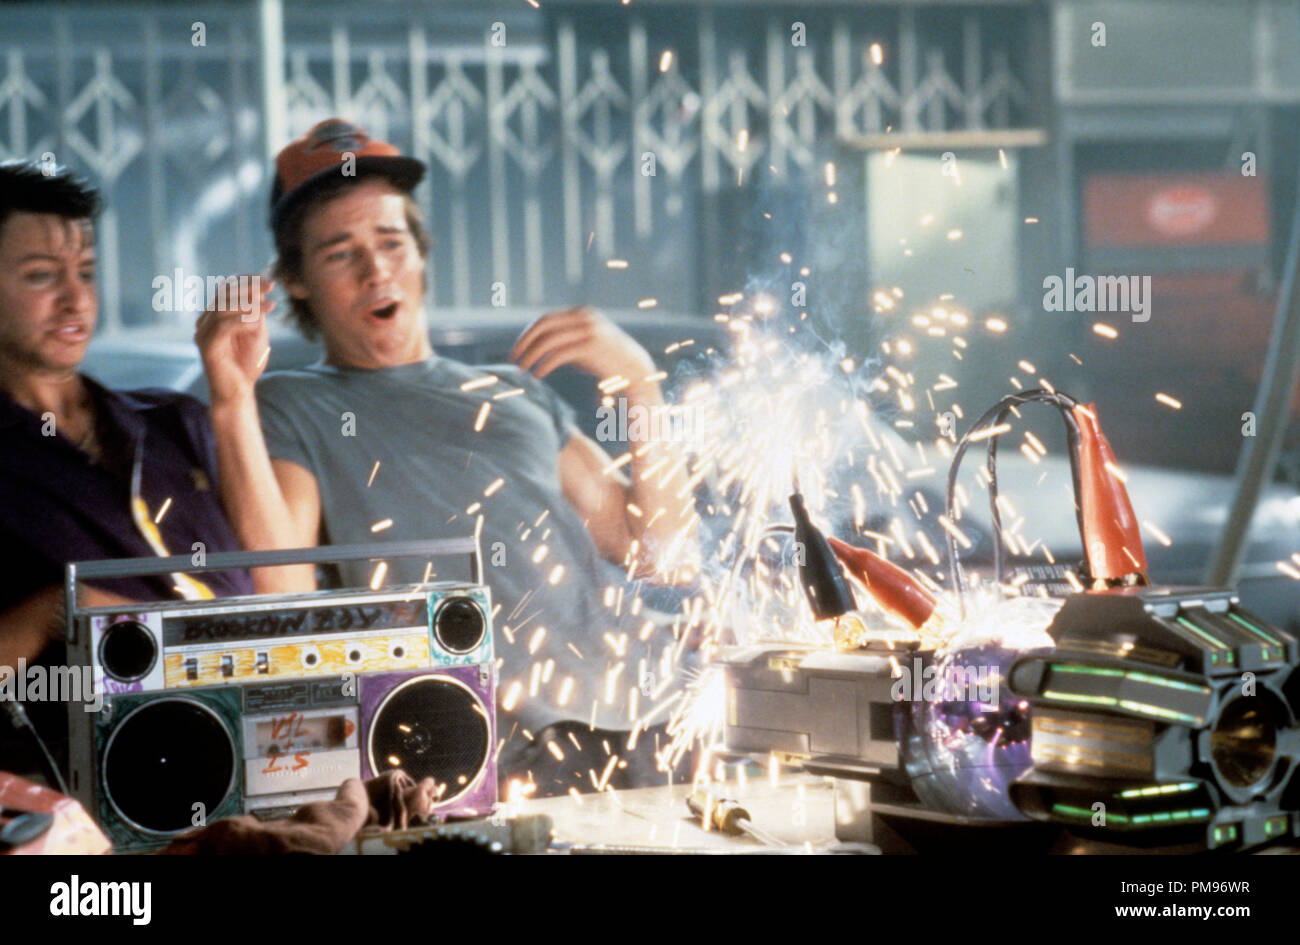 Studio Publicity Still from 'My Science Project' Fisher Stevens, John Stockwell © 1985 Touchstone Pictures  All Rights Reserved   File Reference # 31703211THA  For Editorial Use Only Stock Photo